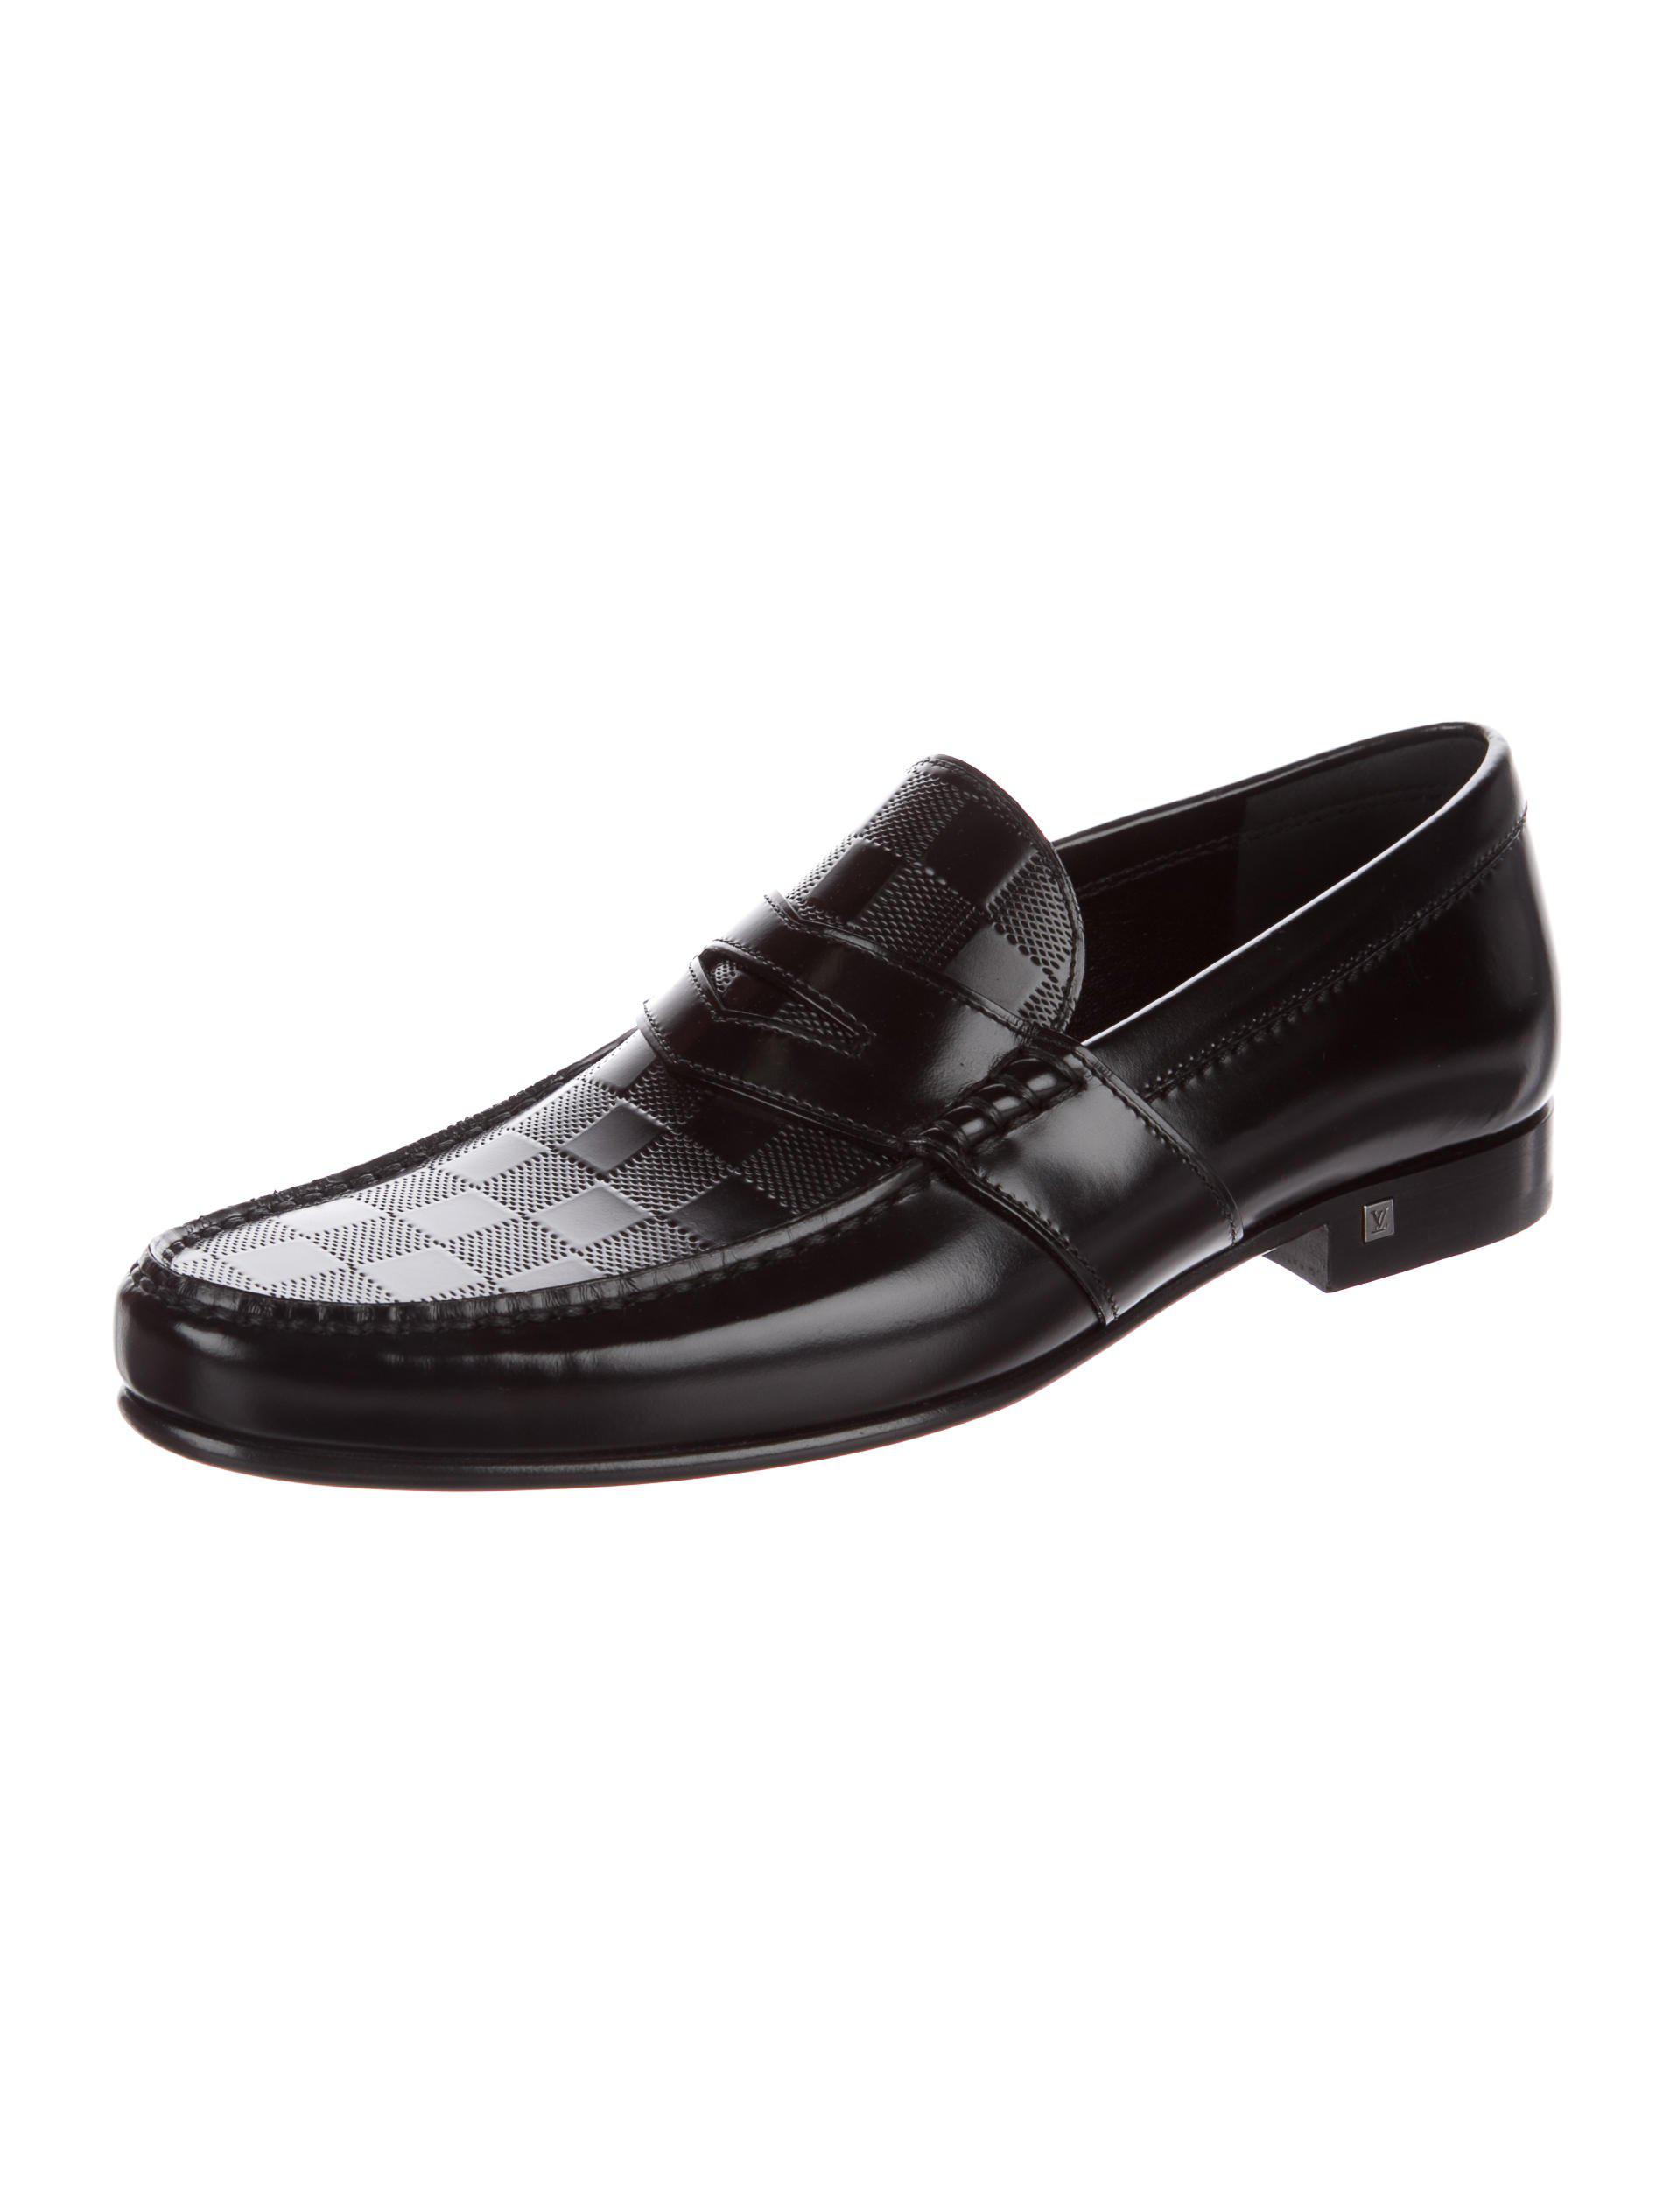 Lv Loafers Men's | Paul Smith